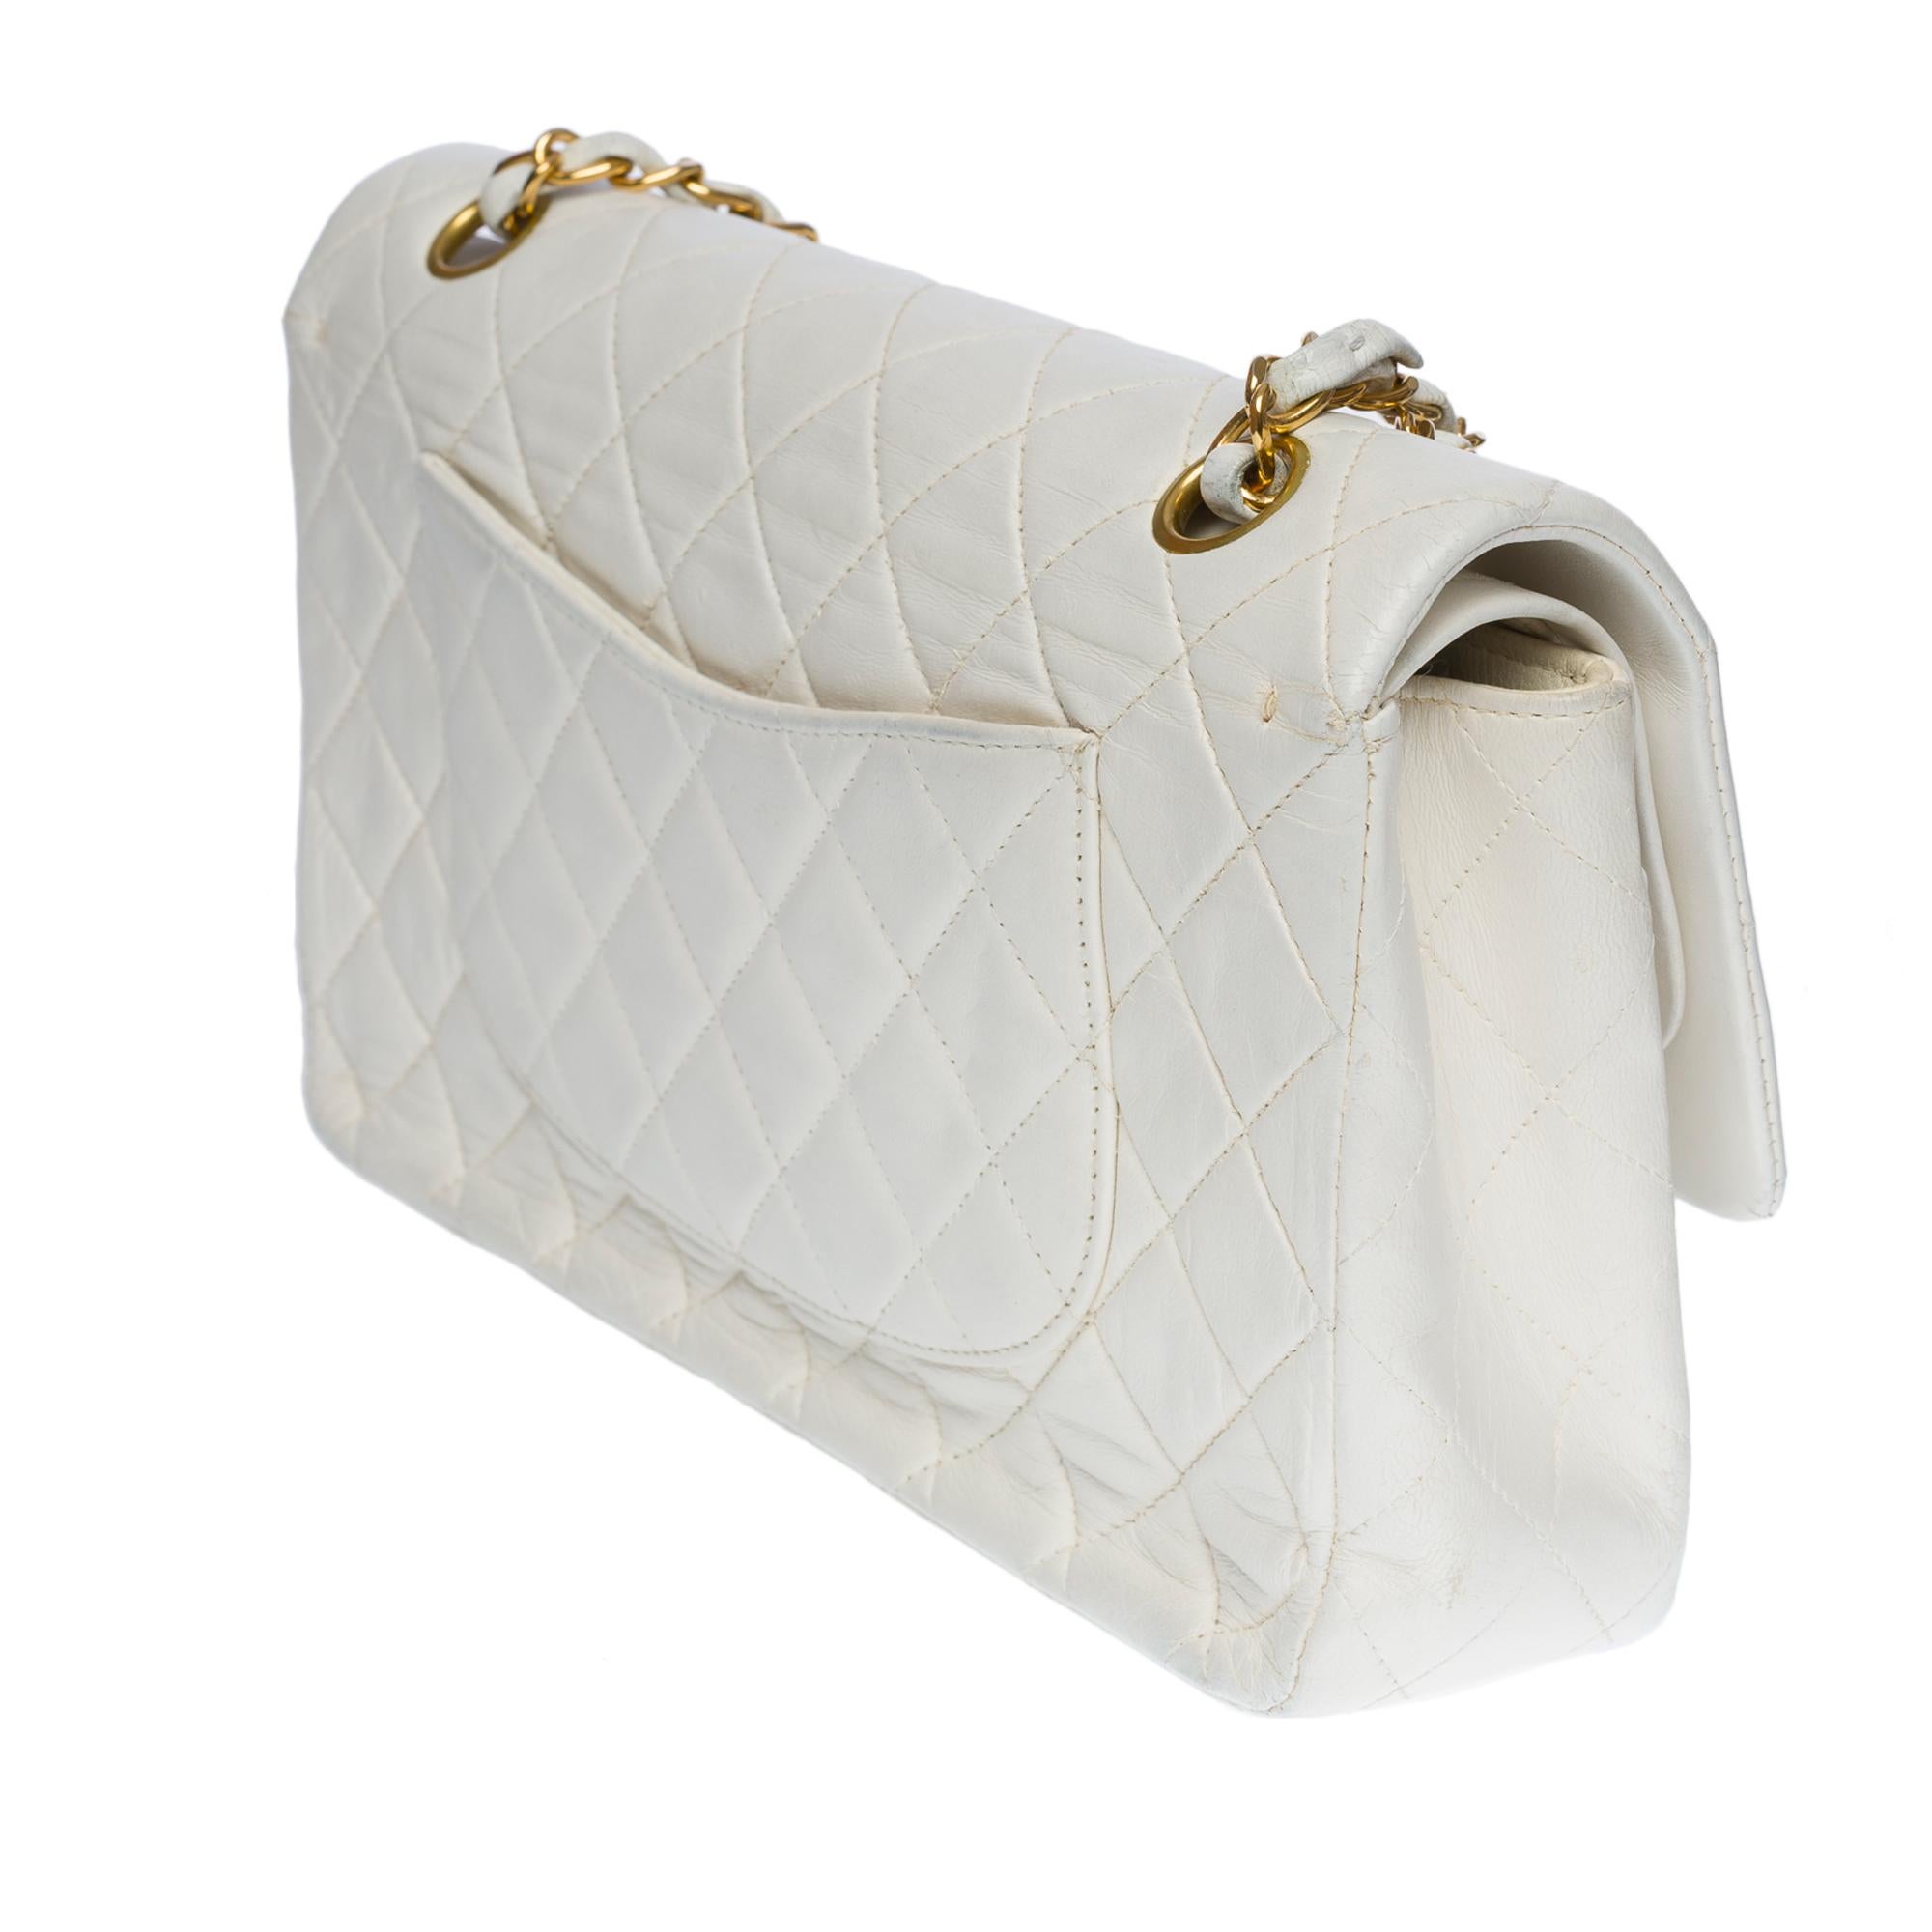 Chanel Timeless Medium double flap Shoulder bag in White quilted lambskin, GHW 1